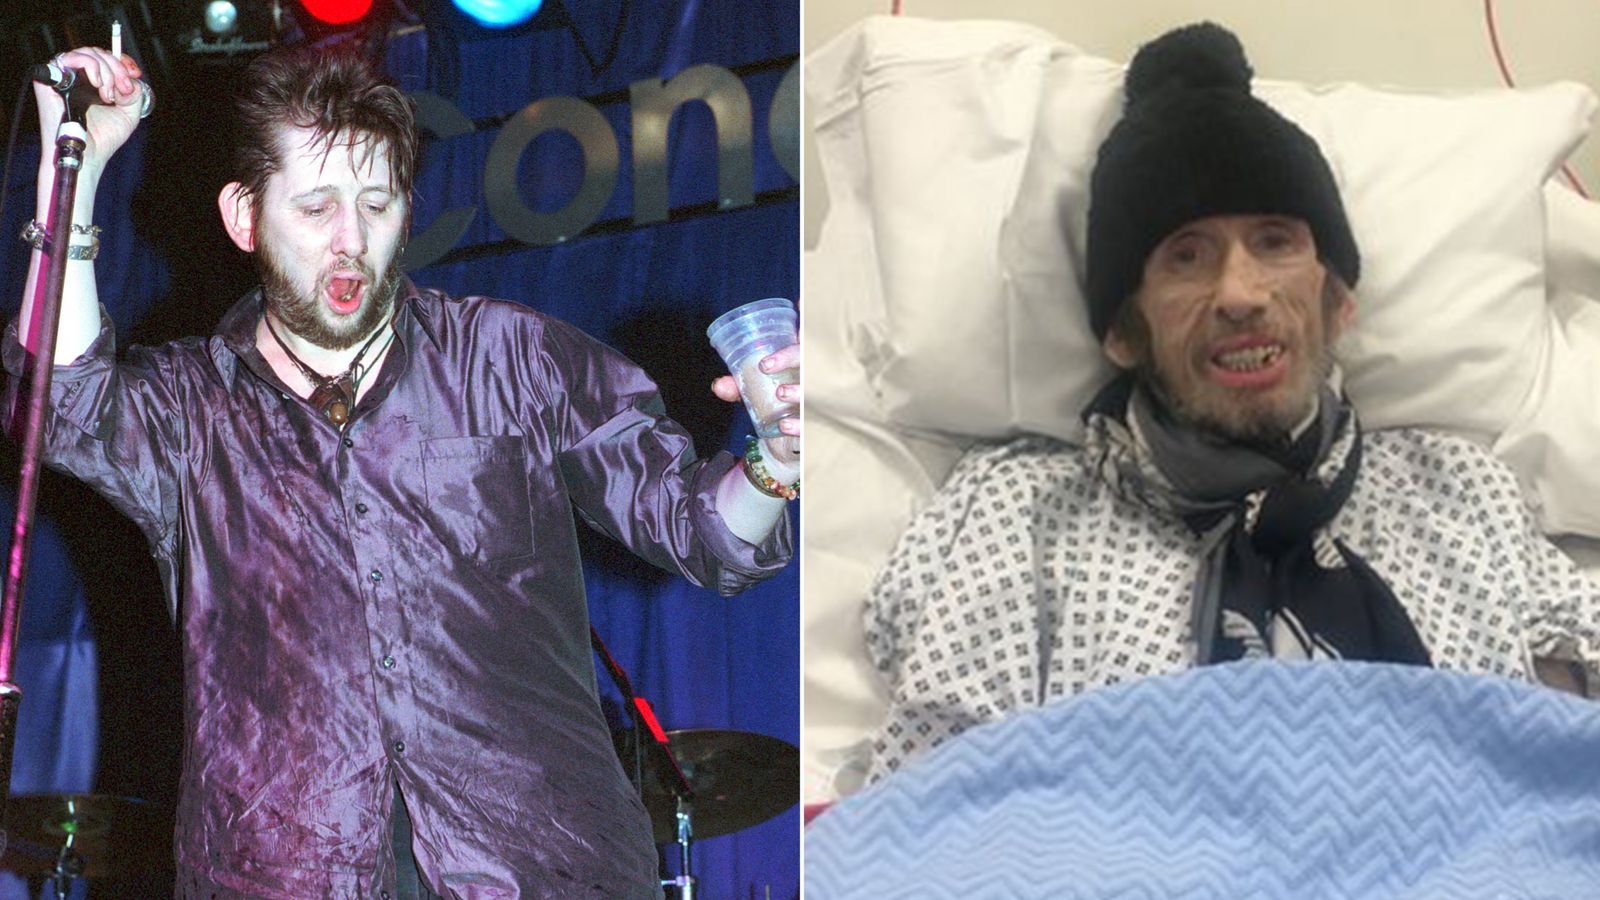 The Pogues singer Shane MacGowan, who wrote 'Fairytale of New York,' dies  at 65 